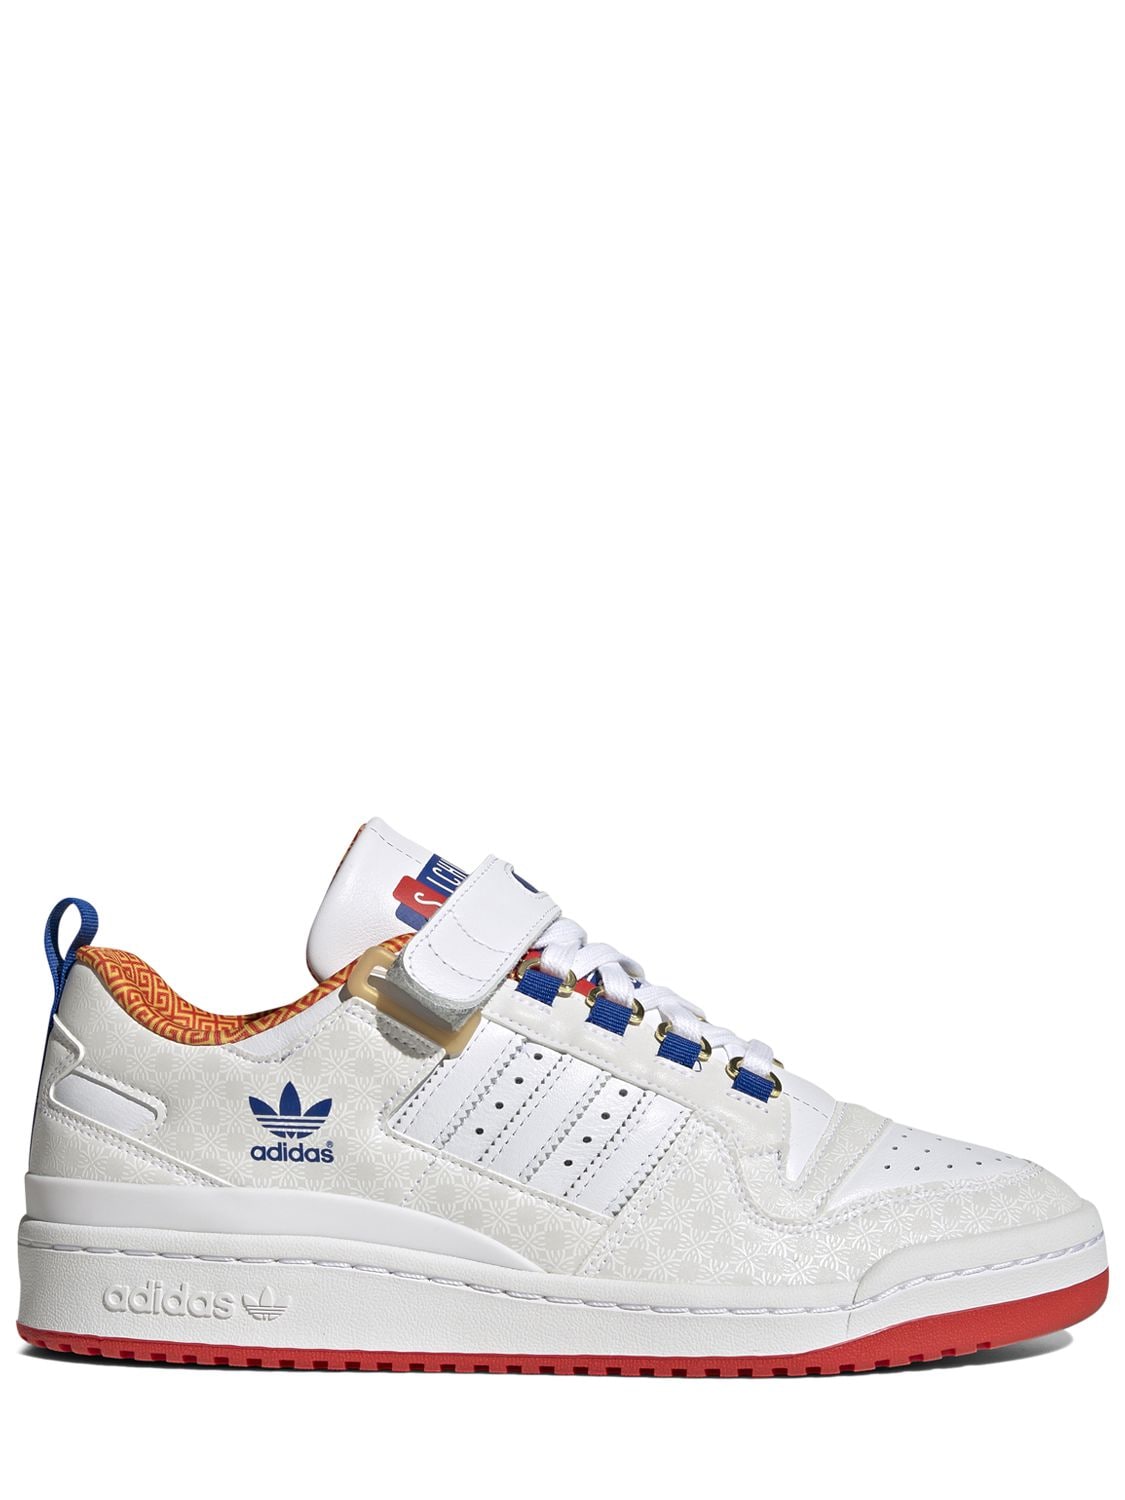 Adidas Originals Forum Low Sneakers In Ftwr White/ftwr White/red